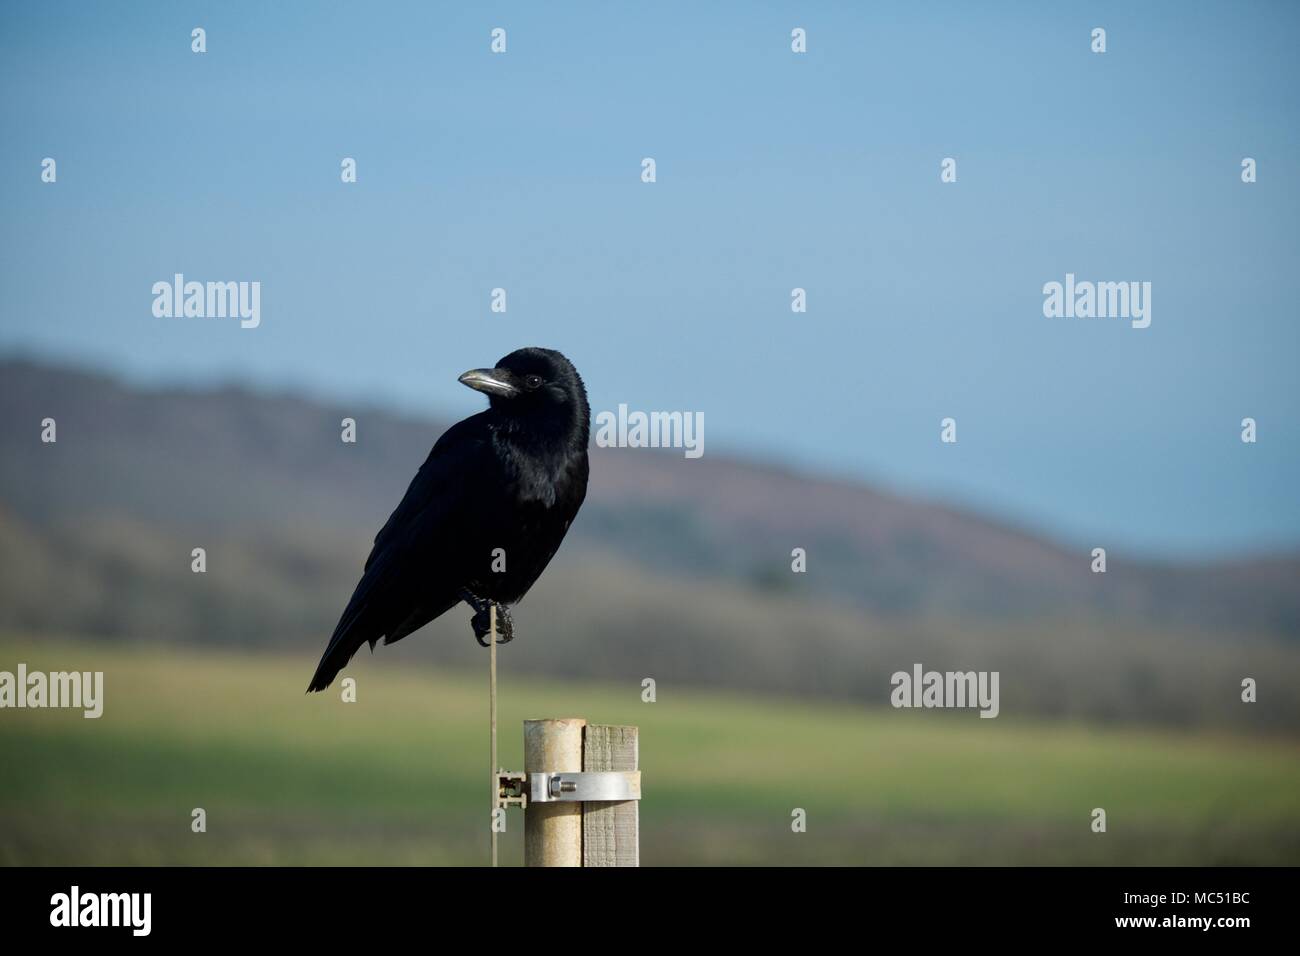 Young juvenile black crow perched on a road sign with bokeh, a blurred background of green fields at Brook near Compton Bay, Isle of Wight. Stock Photo